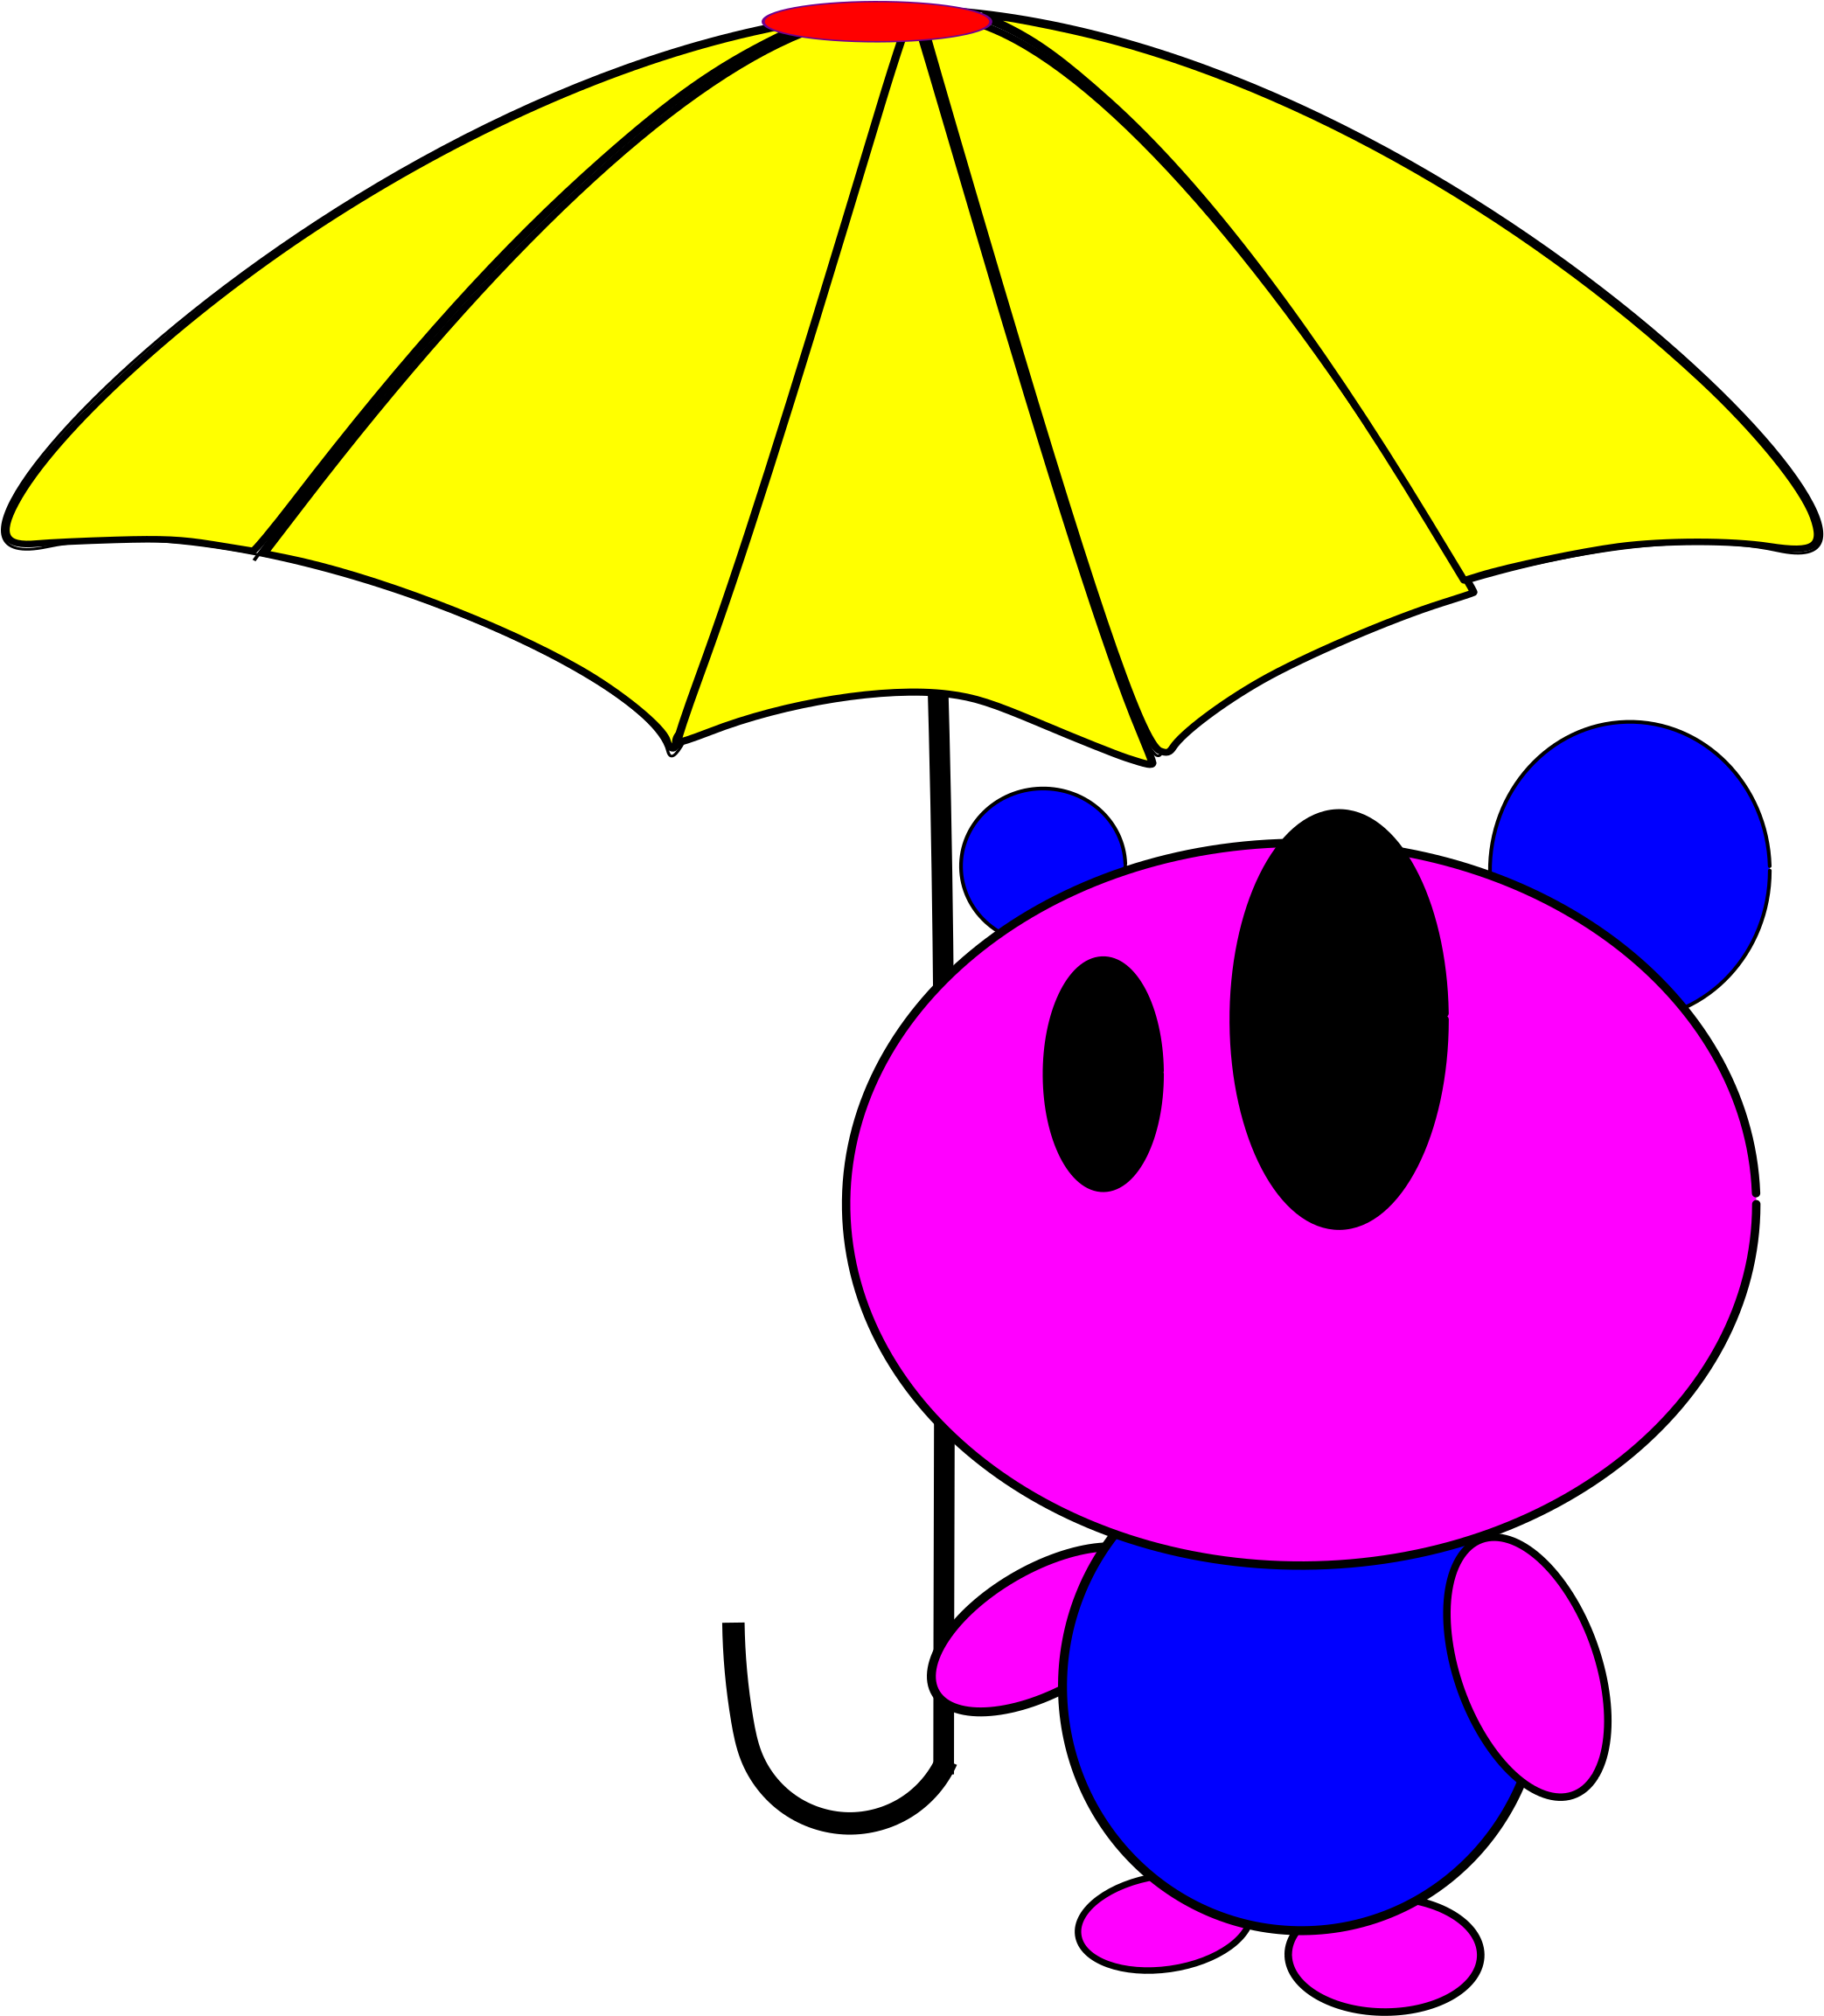 Big Image - Notebook With Bear With Umbrella (2143x2400)